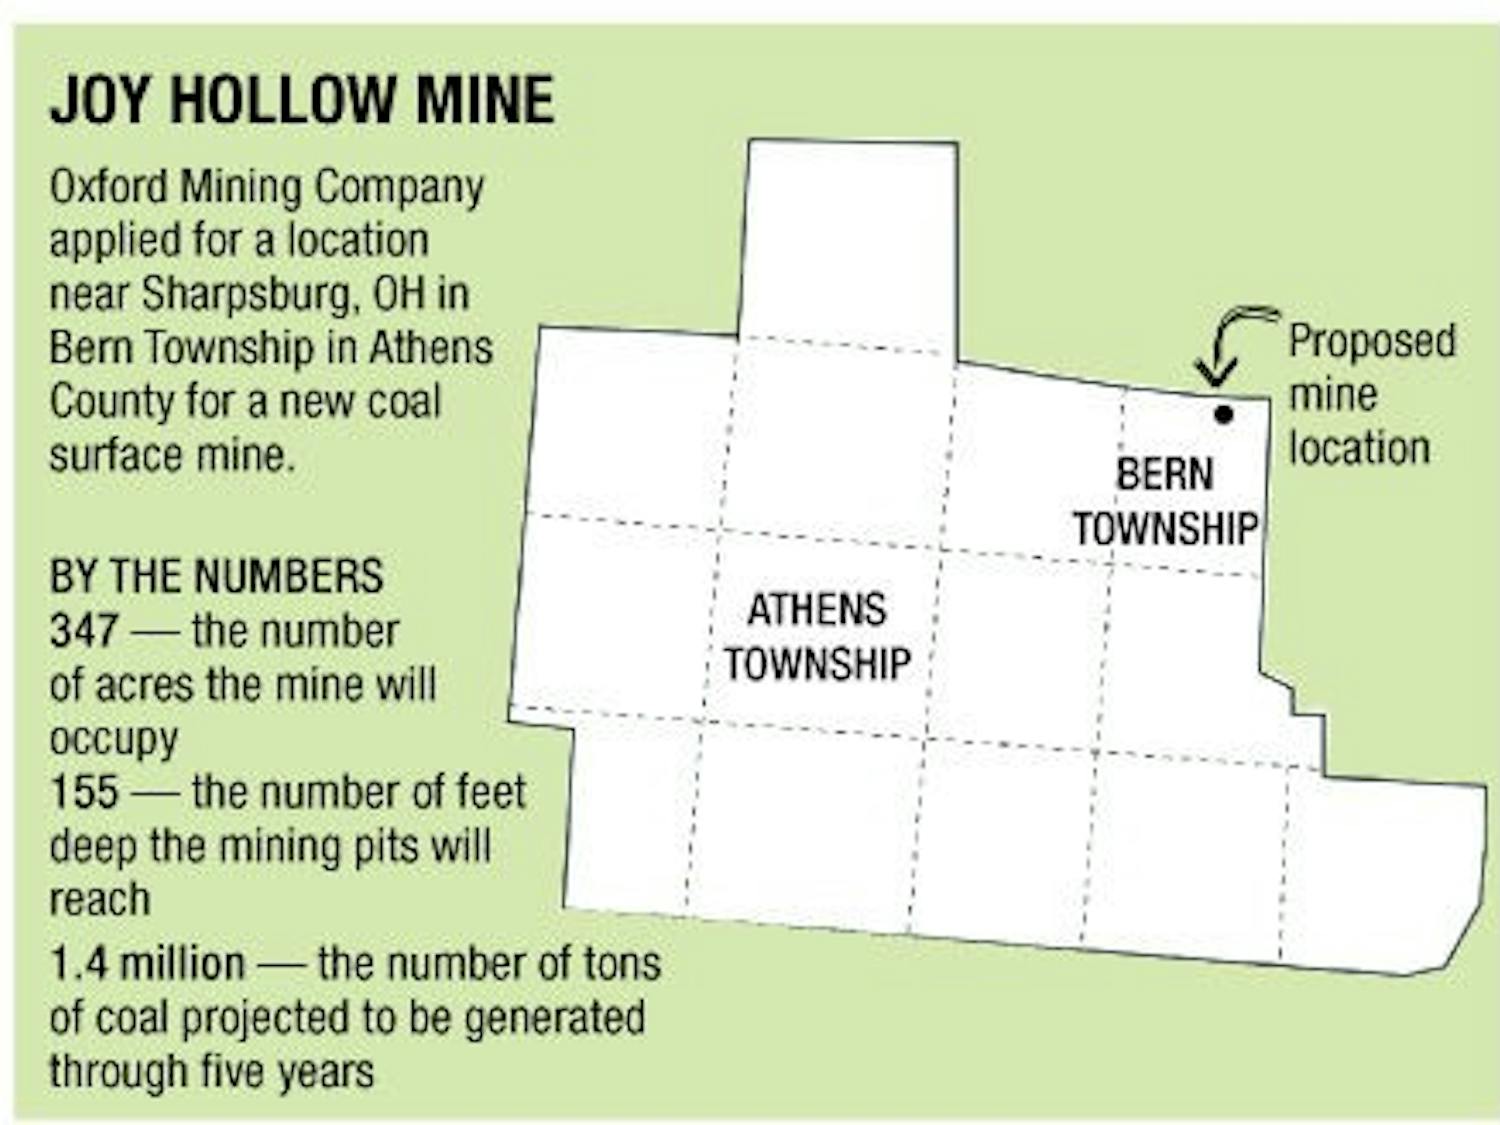 State officials to consider public input on coal mine  